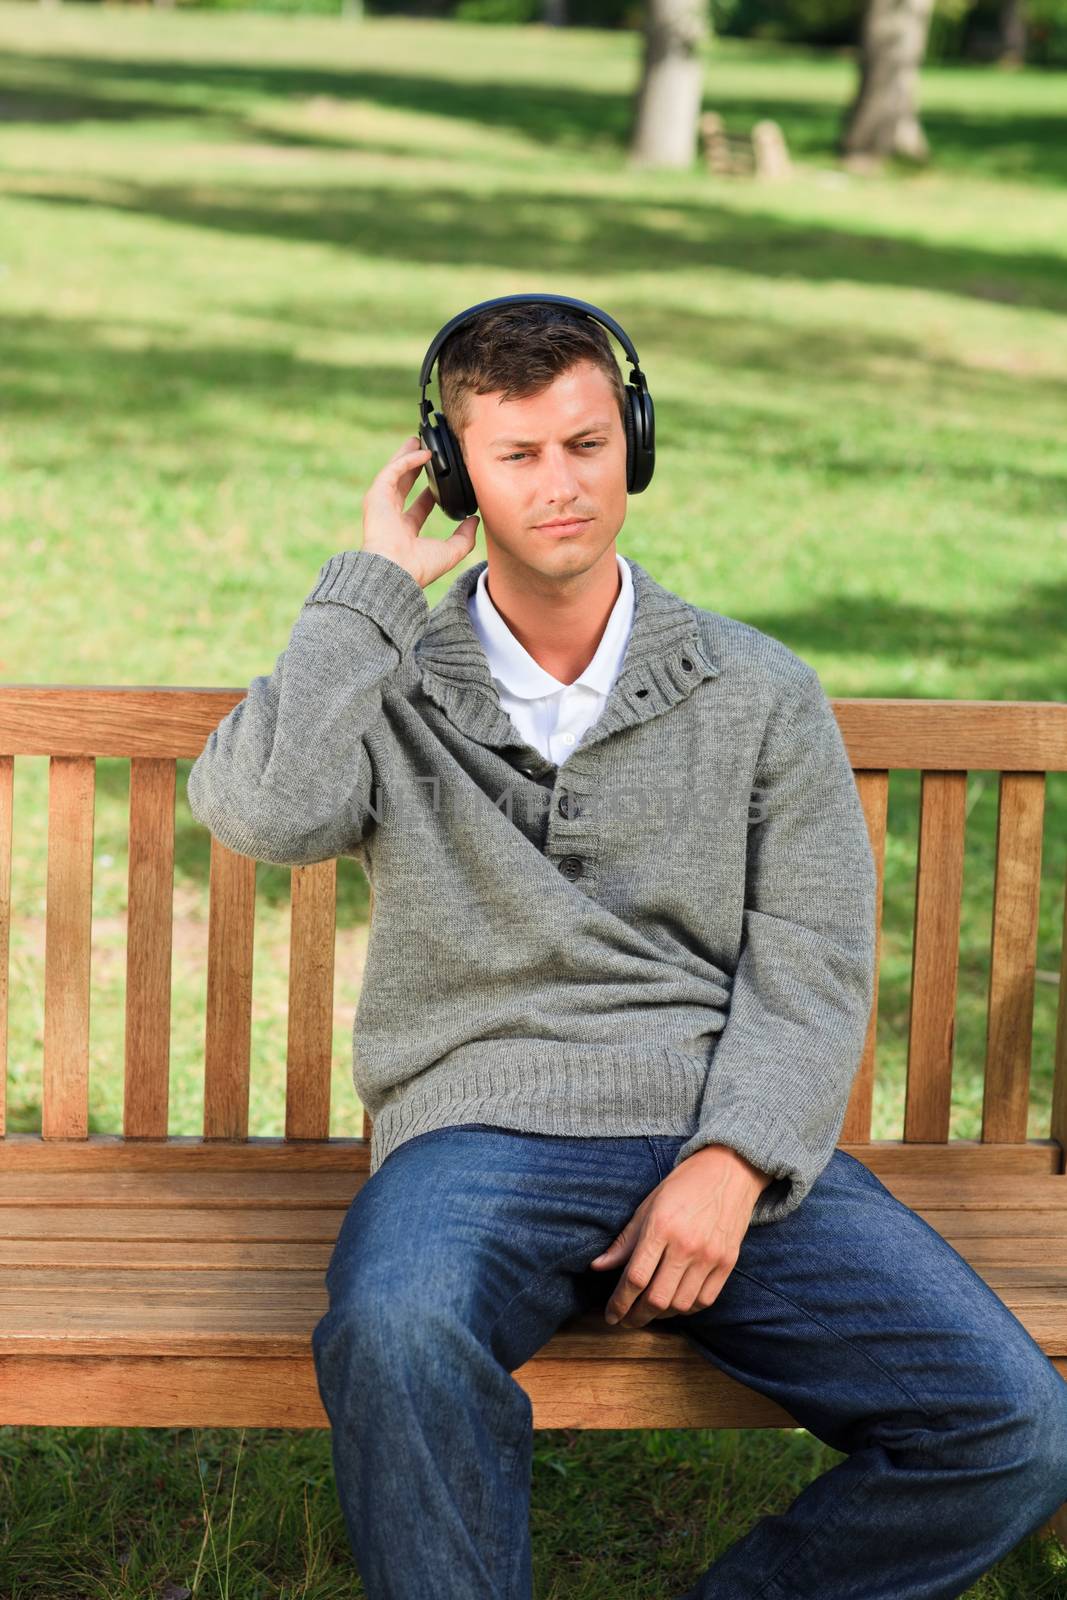 Relaxed man listening to some music  by Wavebreakmedia